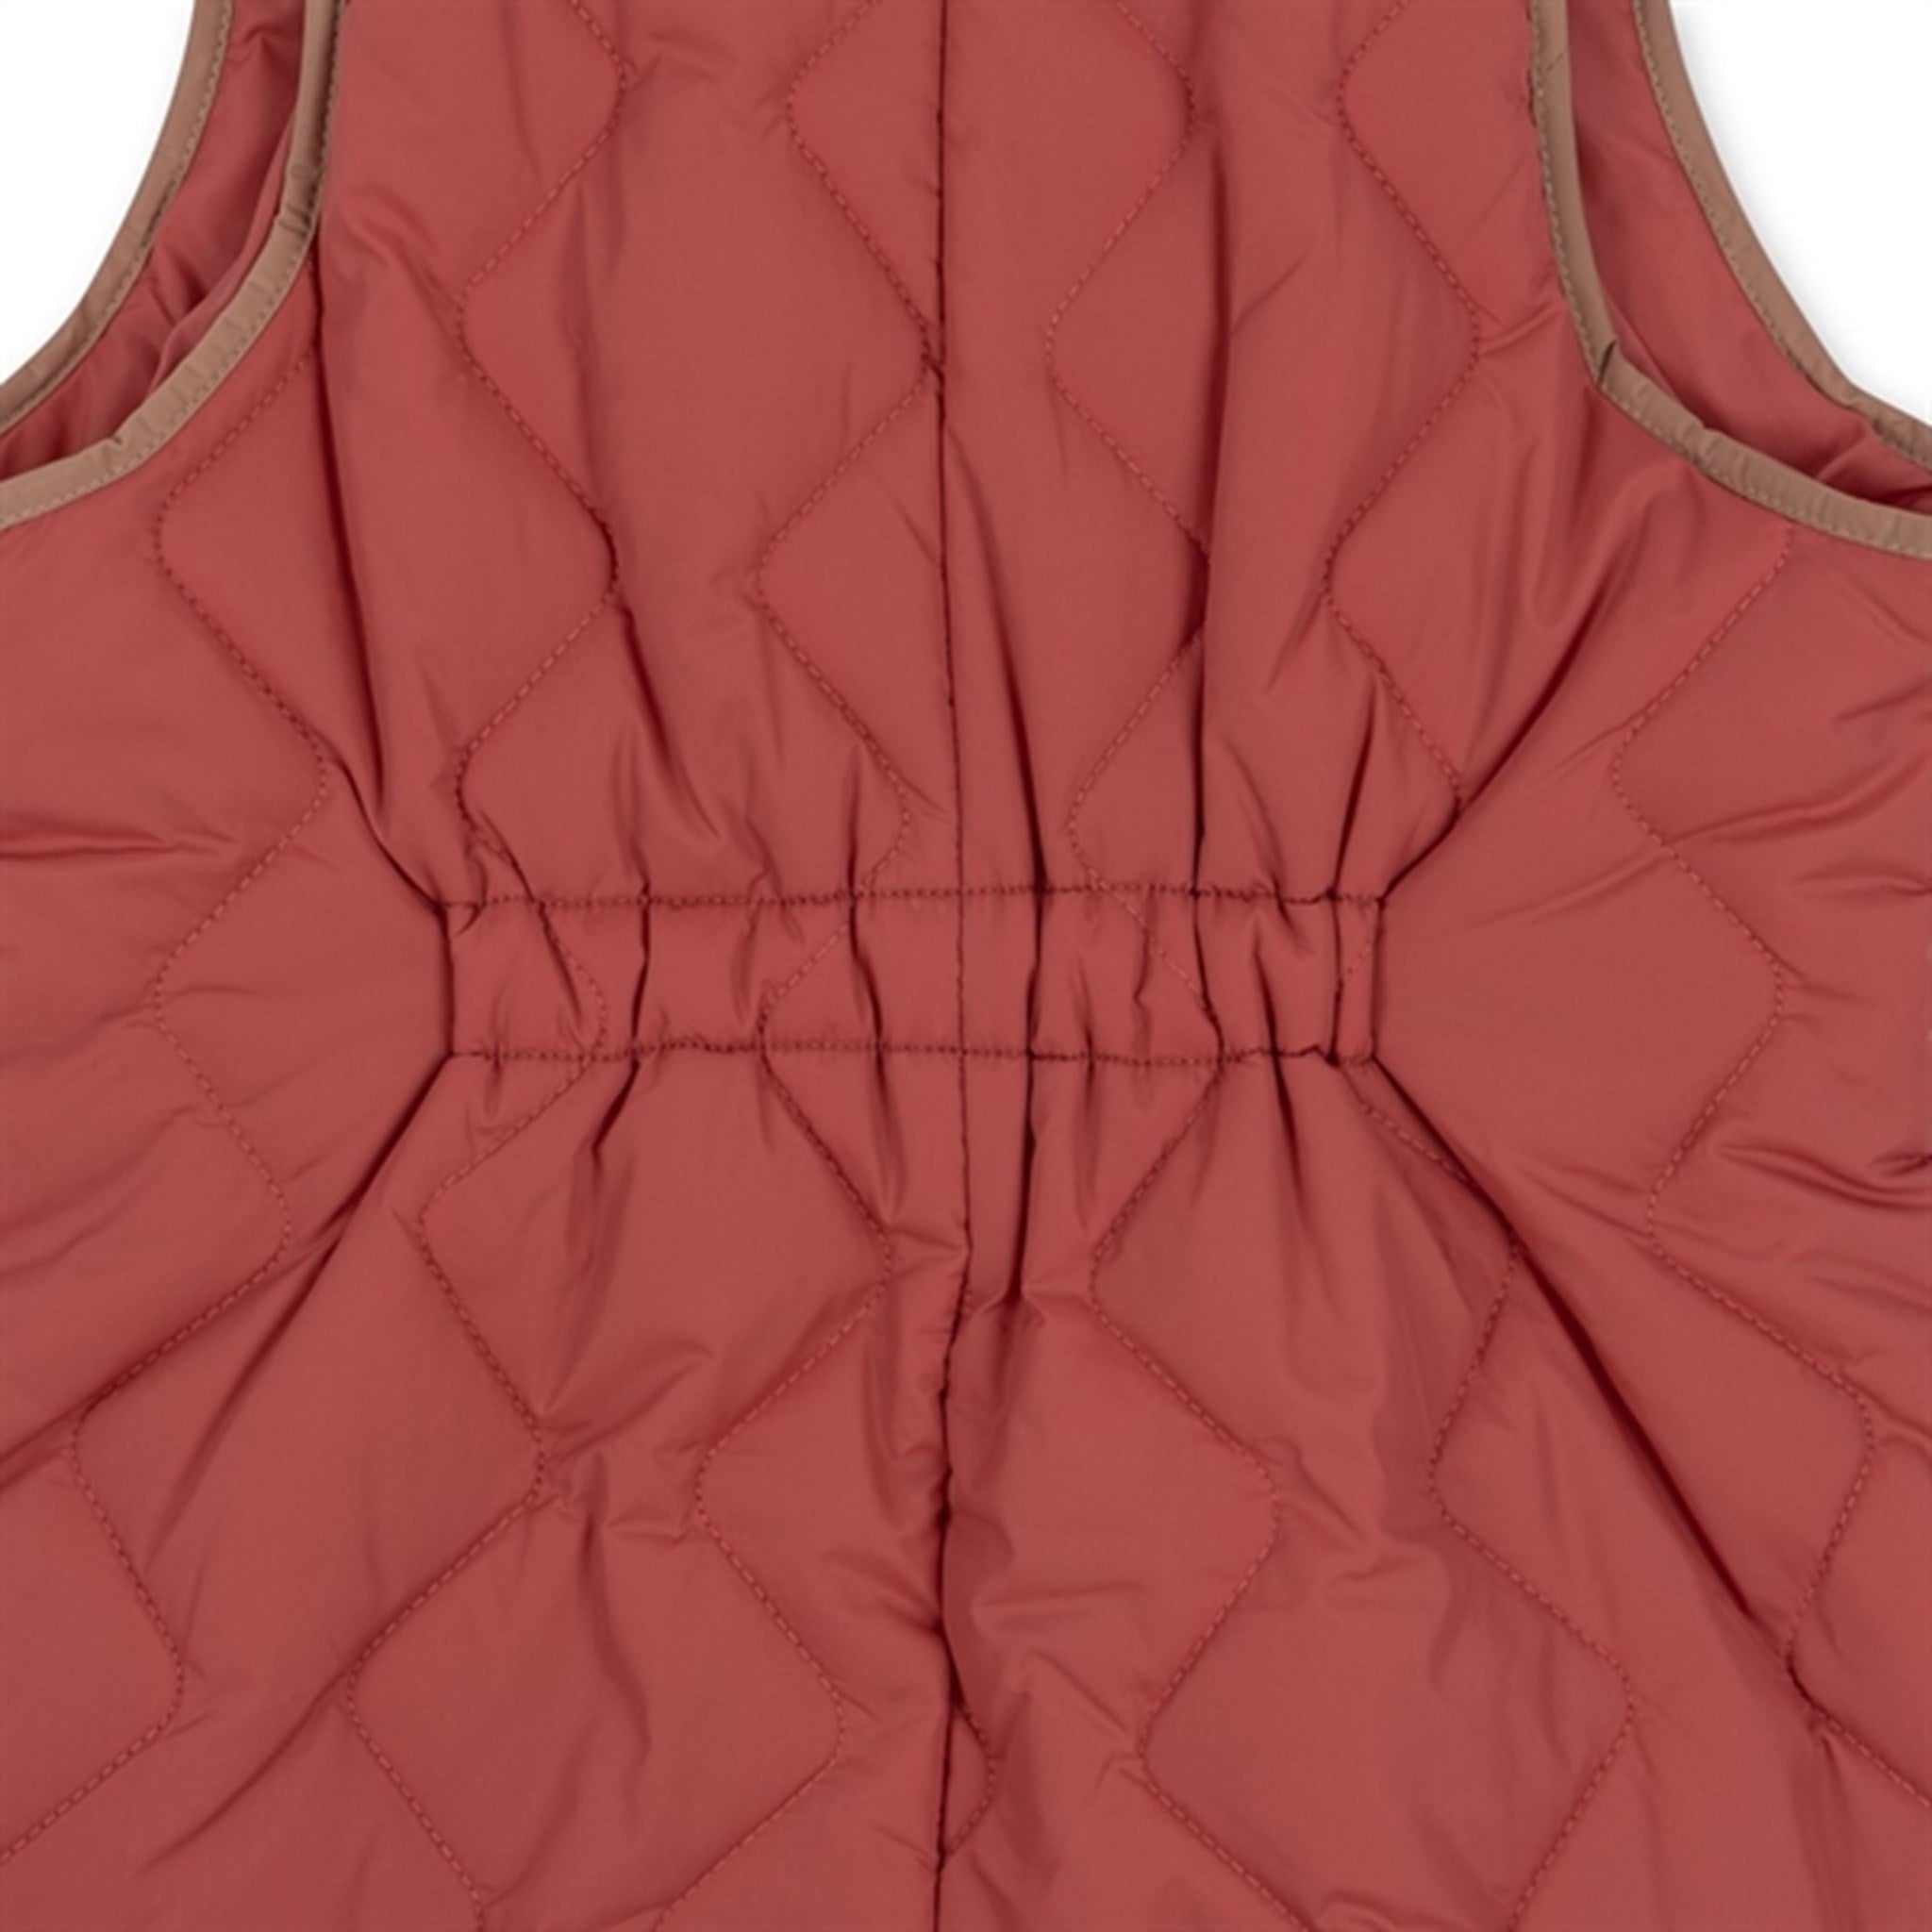 Konges Sløjd Mineral Red Pace Overalls 5